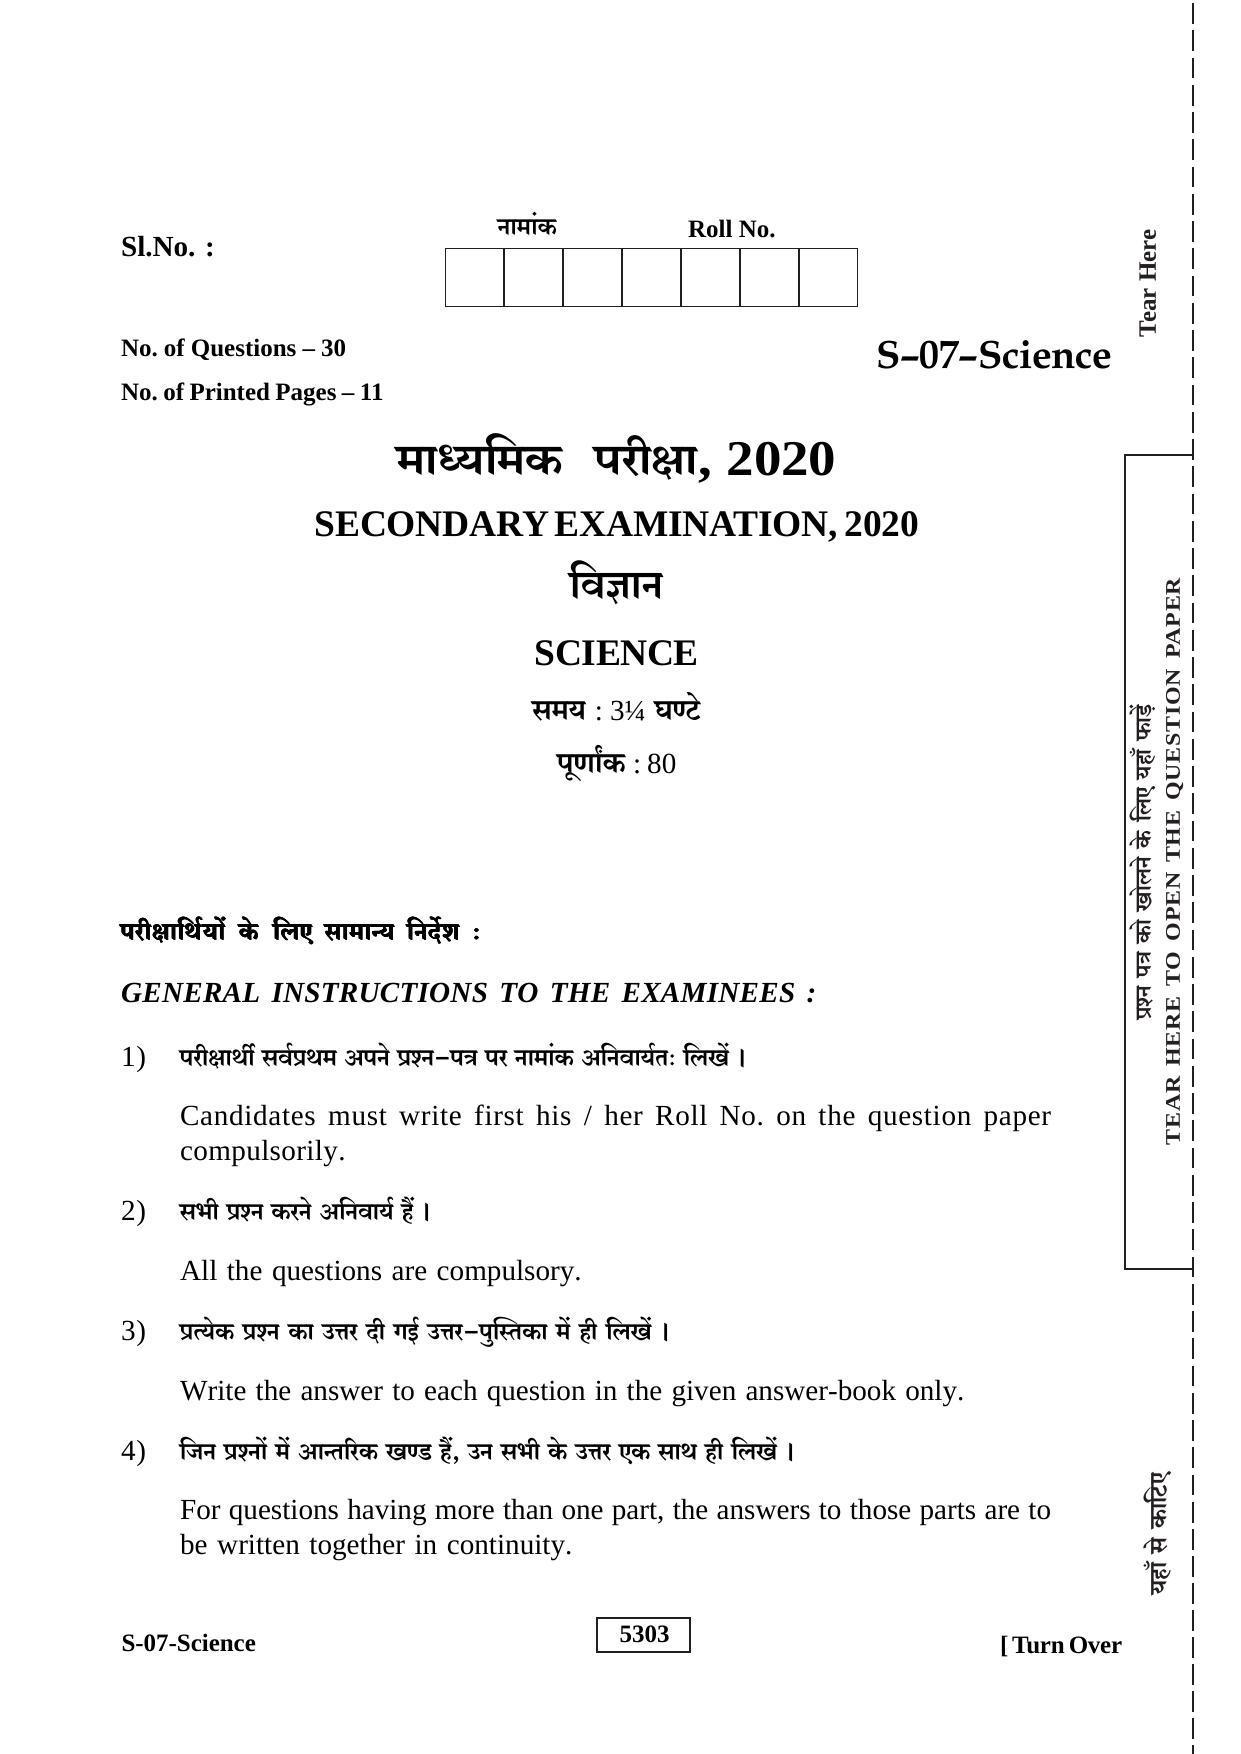 RBSE Class 10 Science 2020 Question Paper - Page 1